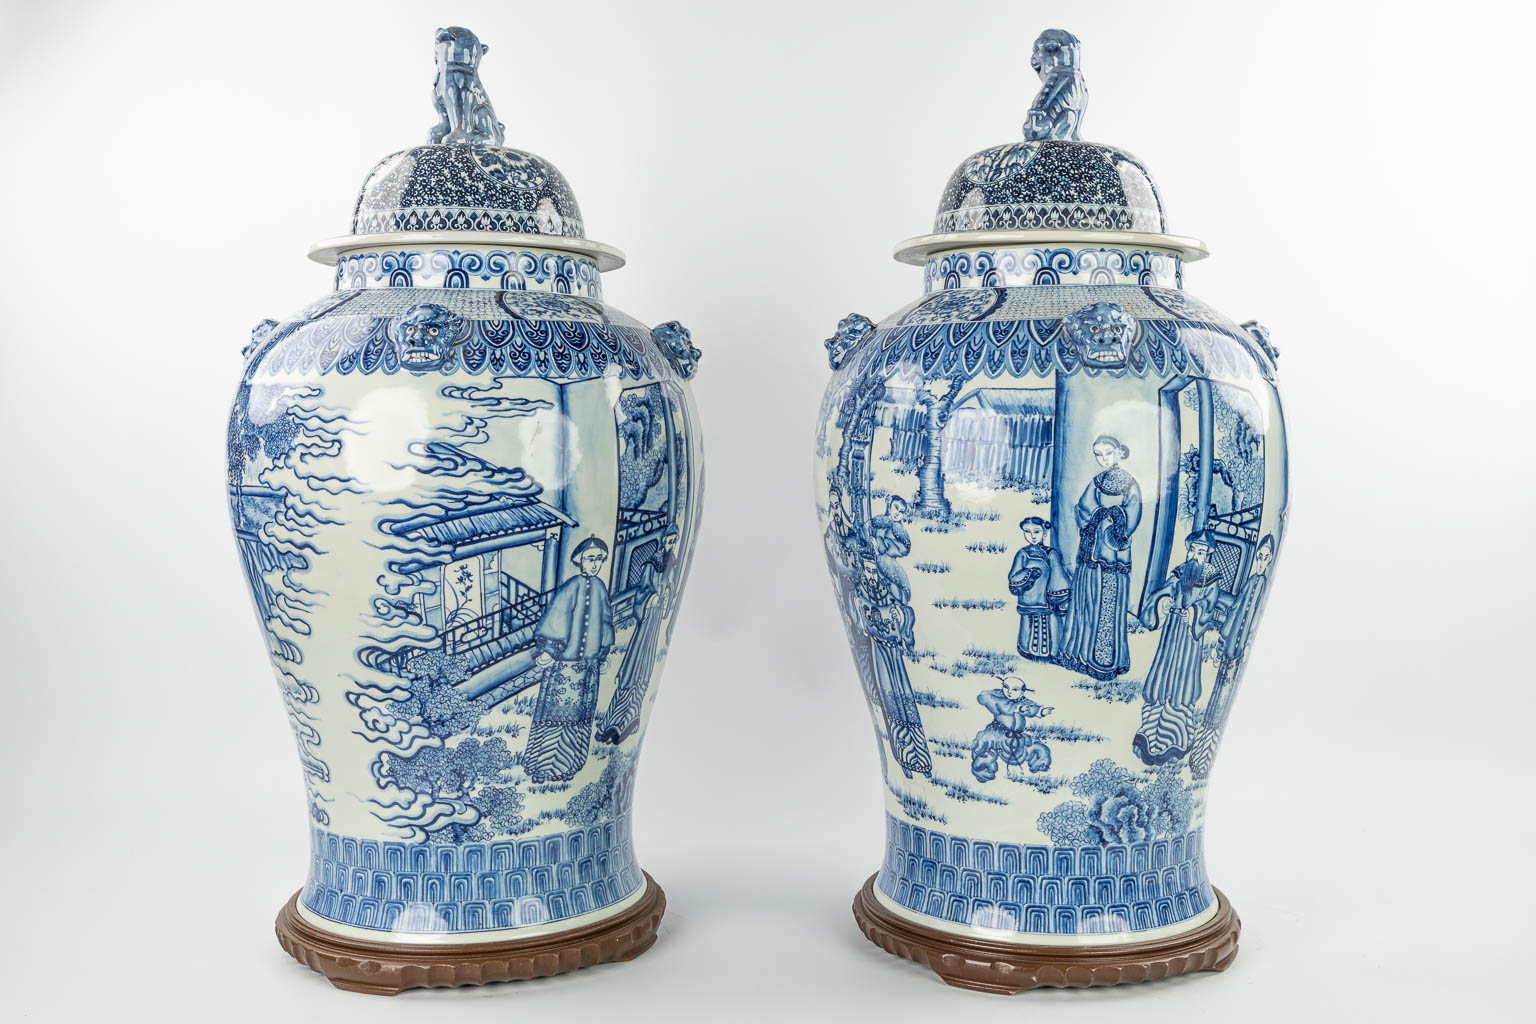 A pair of large Chinese vases with lid, made of blue-white porcelain with the emperor, dragons and w - Image 13 of 15